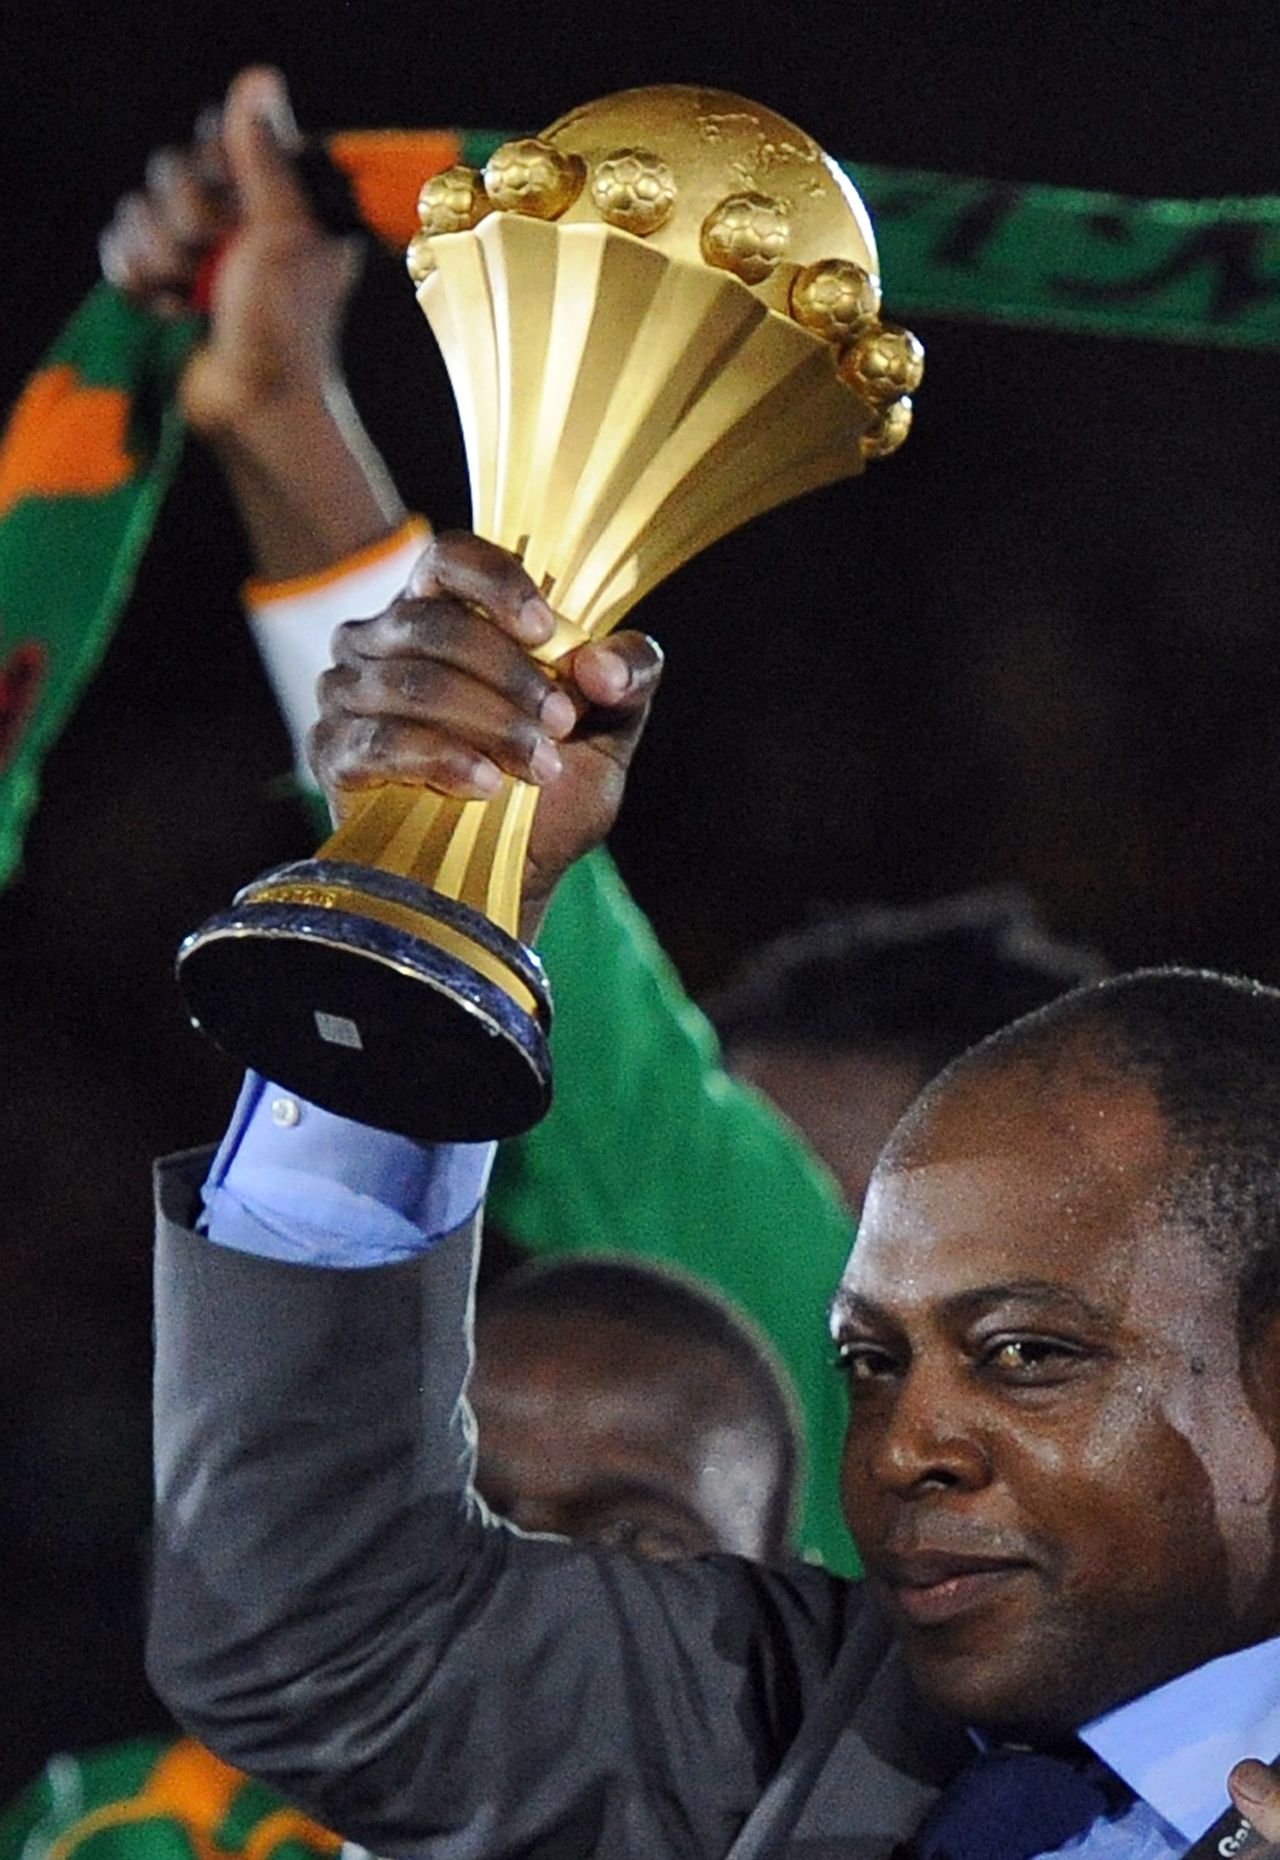 Former Zambia player Kalusha Bwalya holds the Africa Cup of Nations aloft after the Copper Bullets beat Ivory Coast in Sunday's final. Coach Herve Renard dedicated Zambia's historic first title to Bwalya, who is also head of the country's soccer federation.